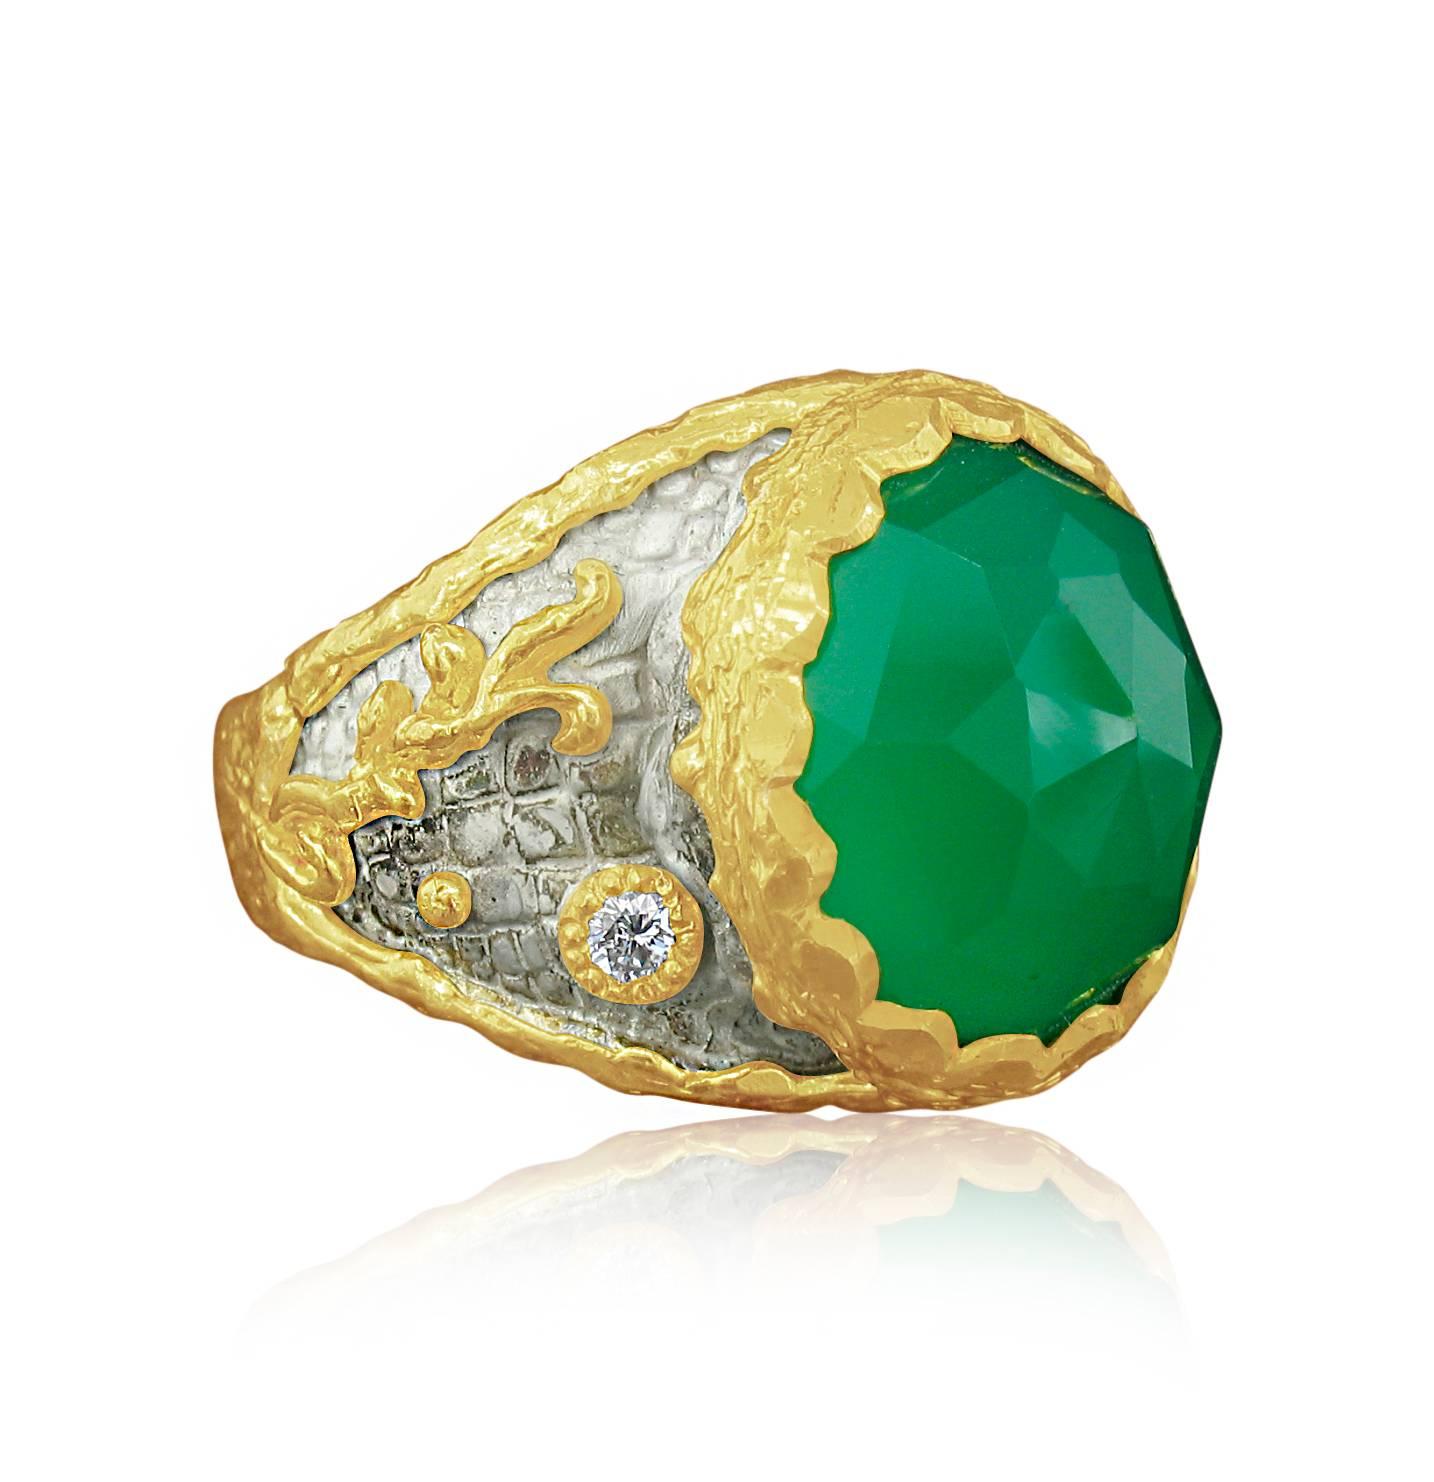 This ring was designed and made by well known designer Victor Velyan. It contains a brilliantly colored, slightly oval Green Onyx weighing 6.53 carats, and Diamond accents weighing 0.11 carats. The Green Onyx is reverse set to reveal the faceting. 